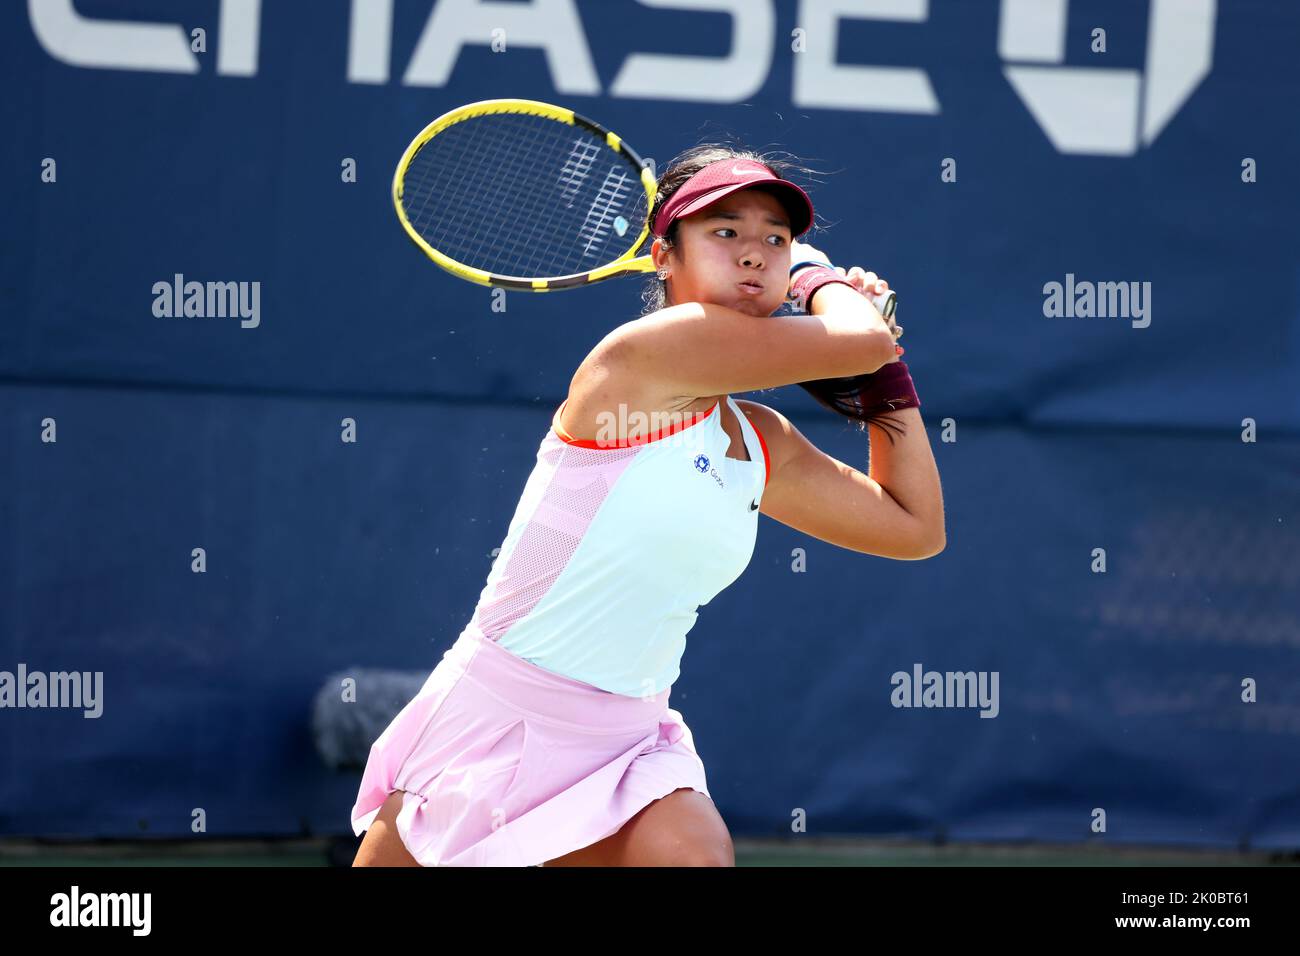 New York, USA. 10th Sep, 2022. Alexandra Eala of the Philippines, in action during the US Open Girls Singles final against Lucie Havlickova of the Czech Republic. Eala won the match in straight sets to claim the Girls Juniors title. Credit: Adam Stoltman/Alamy Live News Credit: Adam Stoltman/Alamy Live News Stock Photo